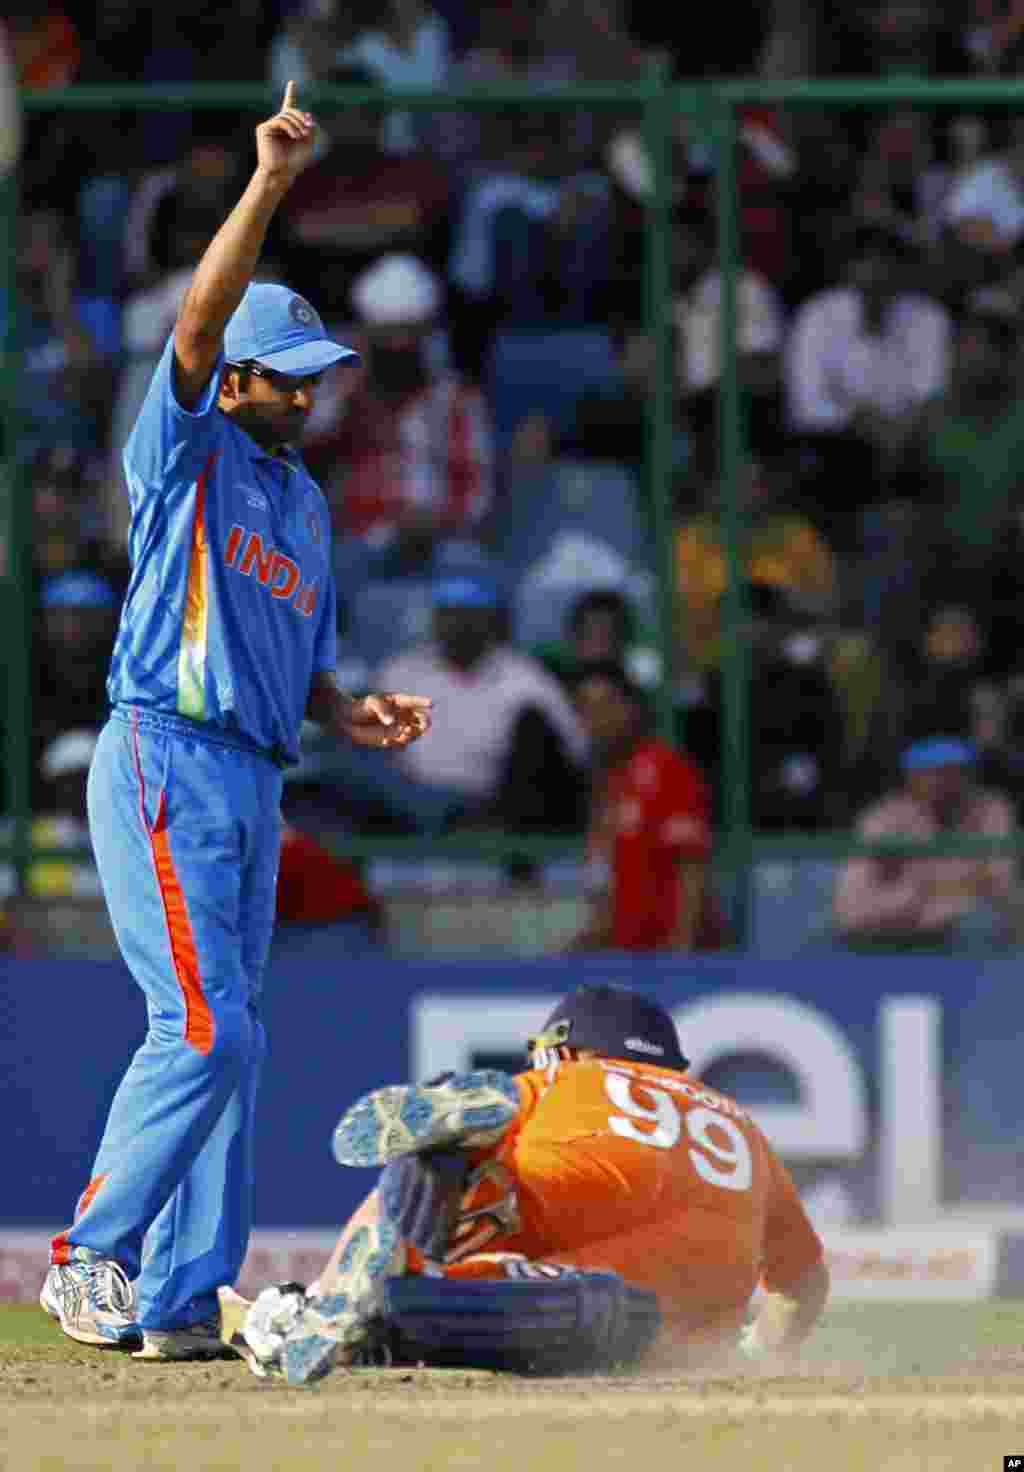 India's Gautam Gambhir celebrates the run out of the The Netherlands' Tom de Grooth (bottom) during their ICC Cricket World Cup group B match in New Delhi March 9, 2011. REUTERS/Adnan Abidi (INDIA - Tags: SPORT CRICKET)